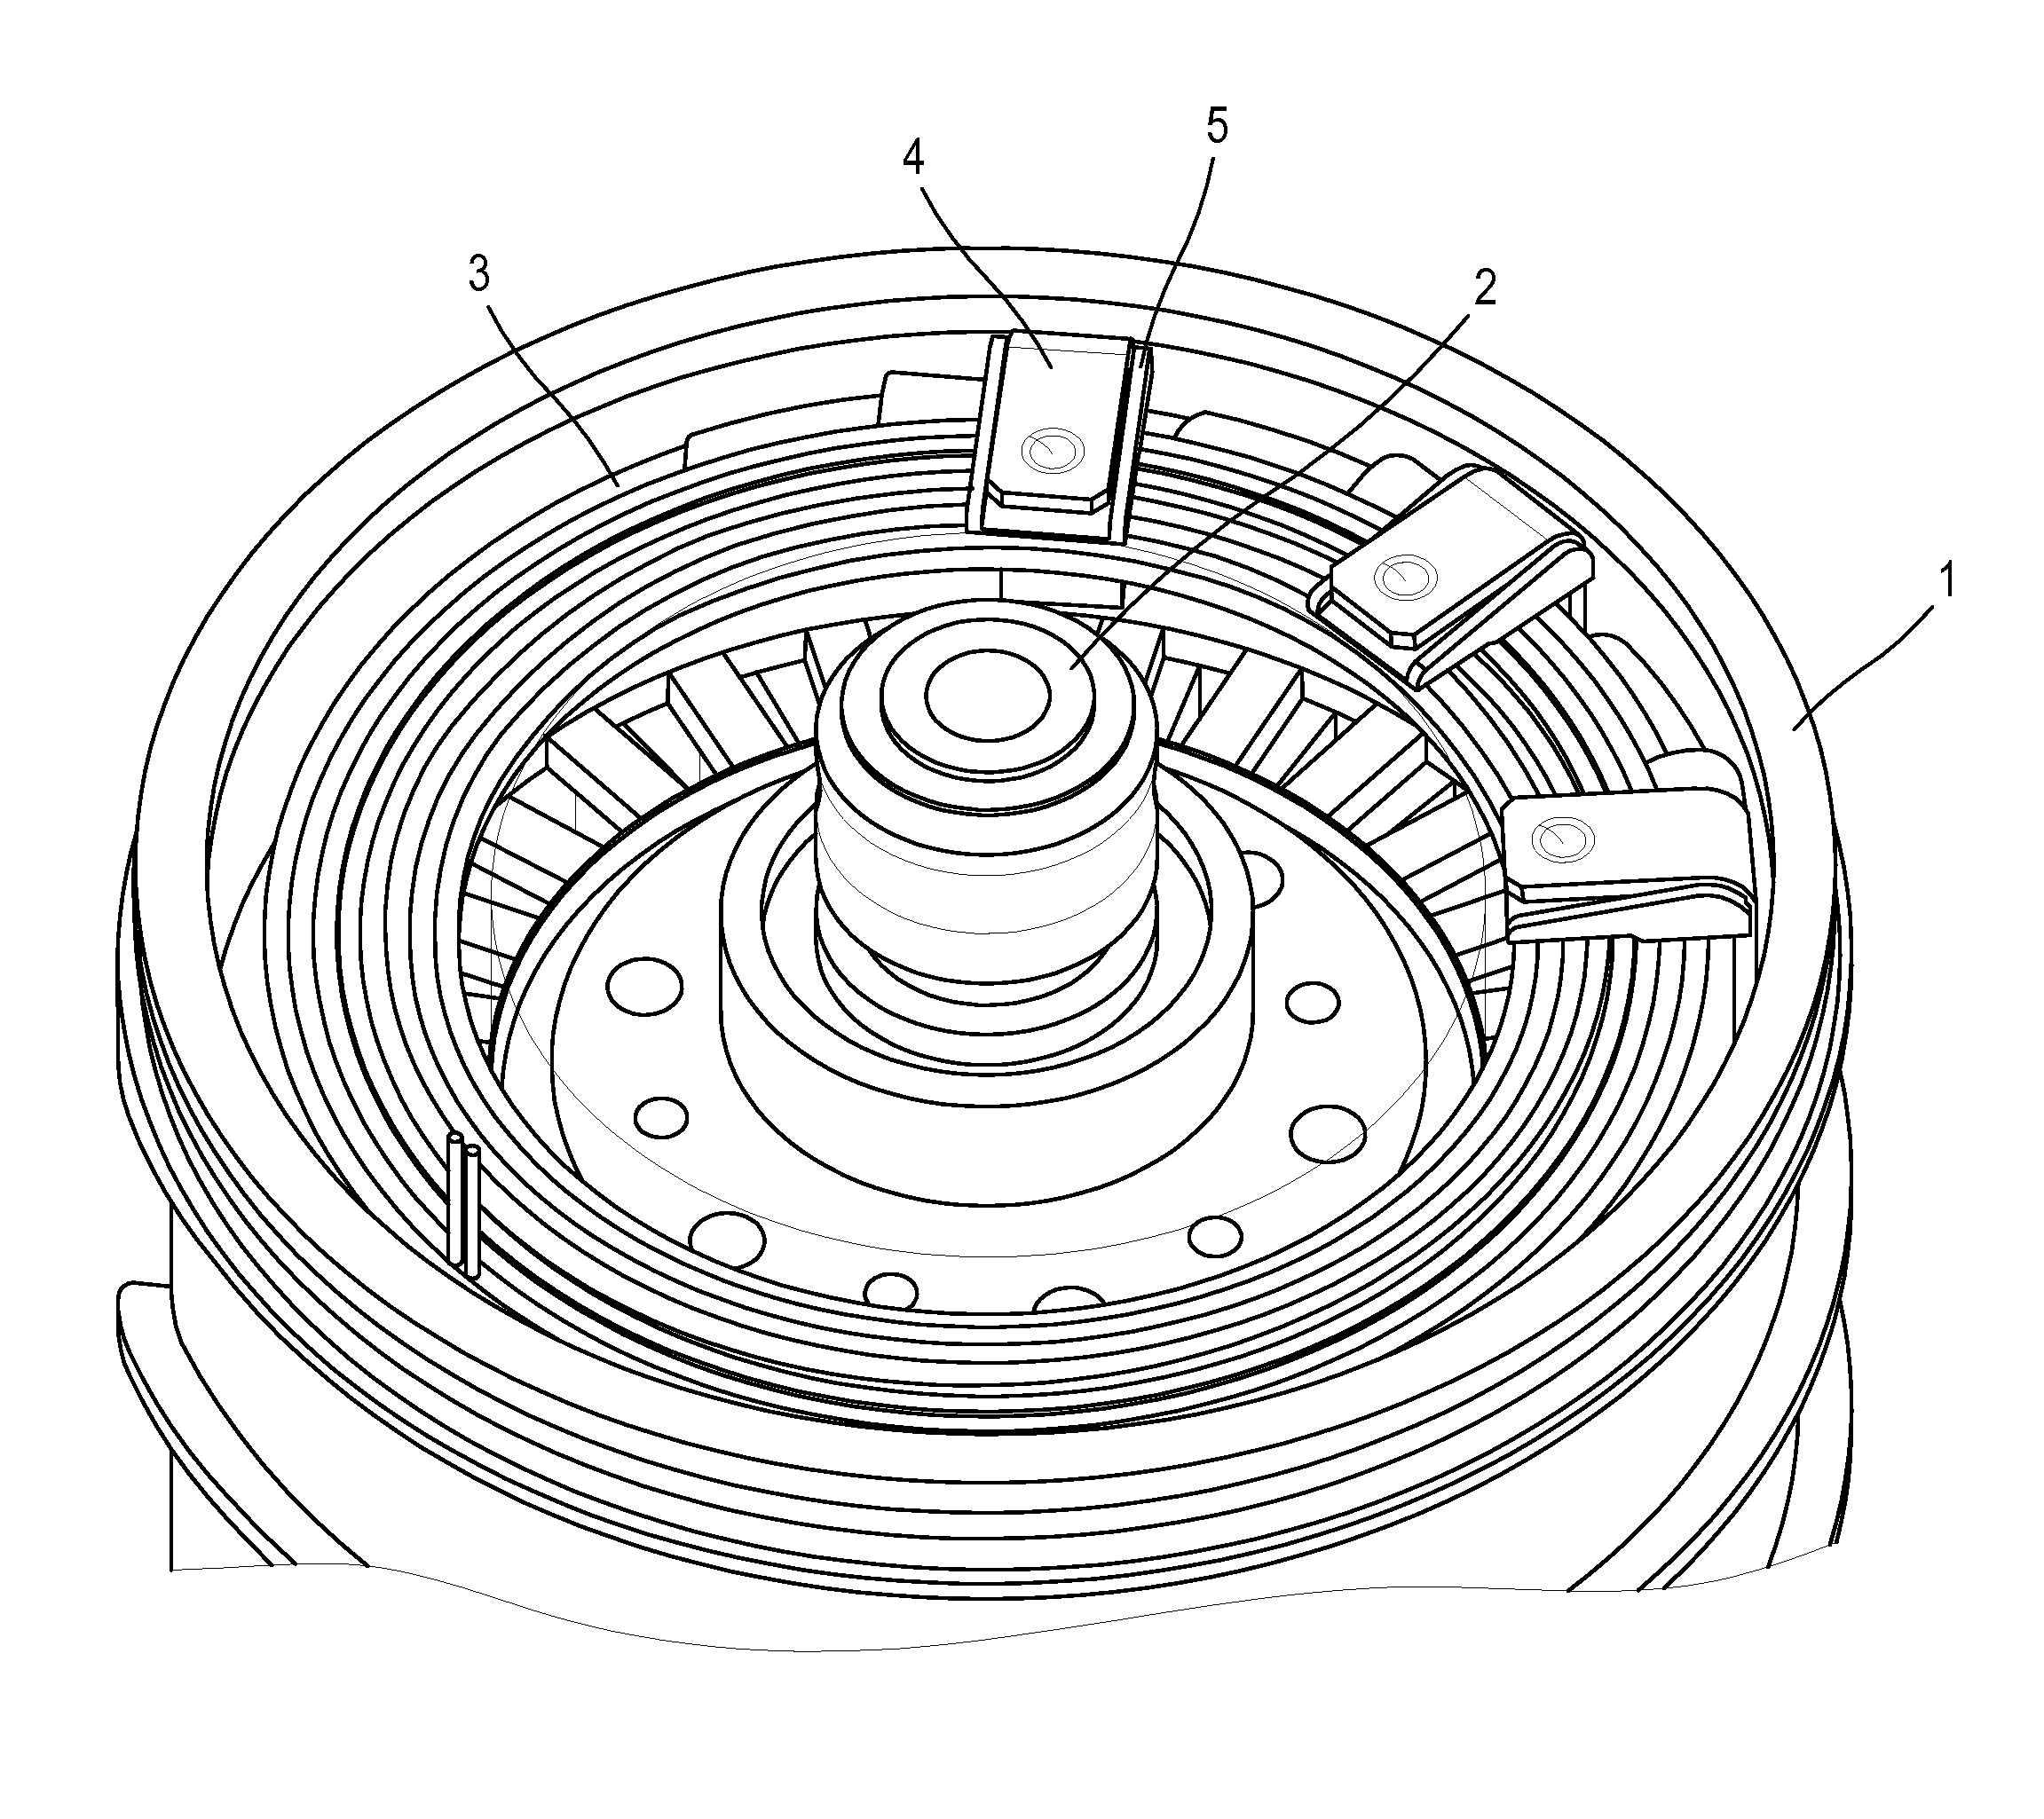 Electrical machine with contact connectors